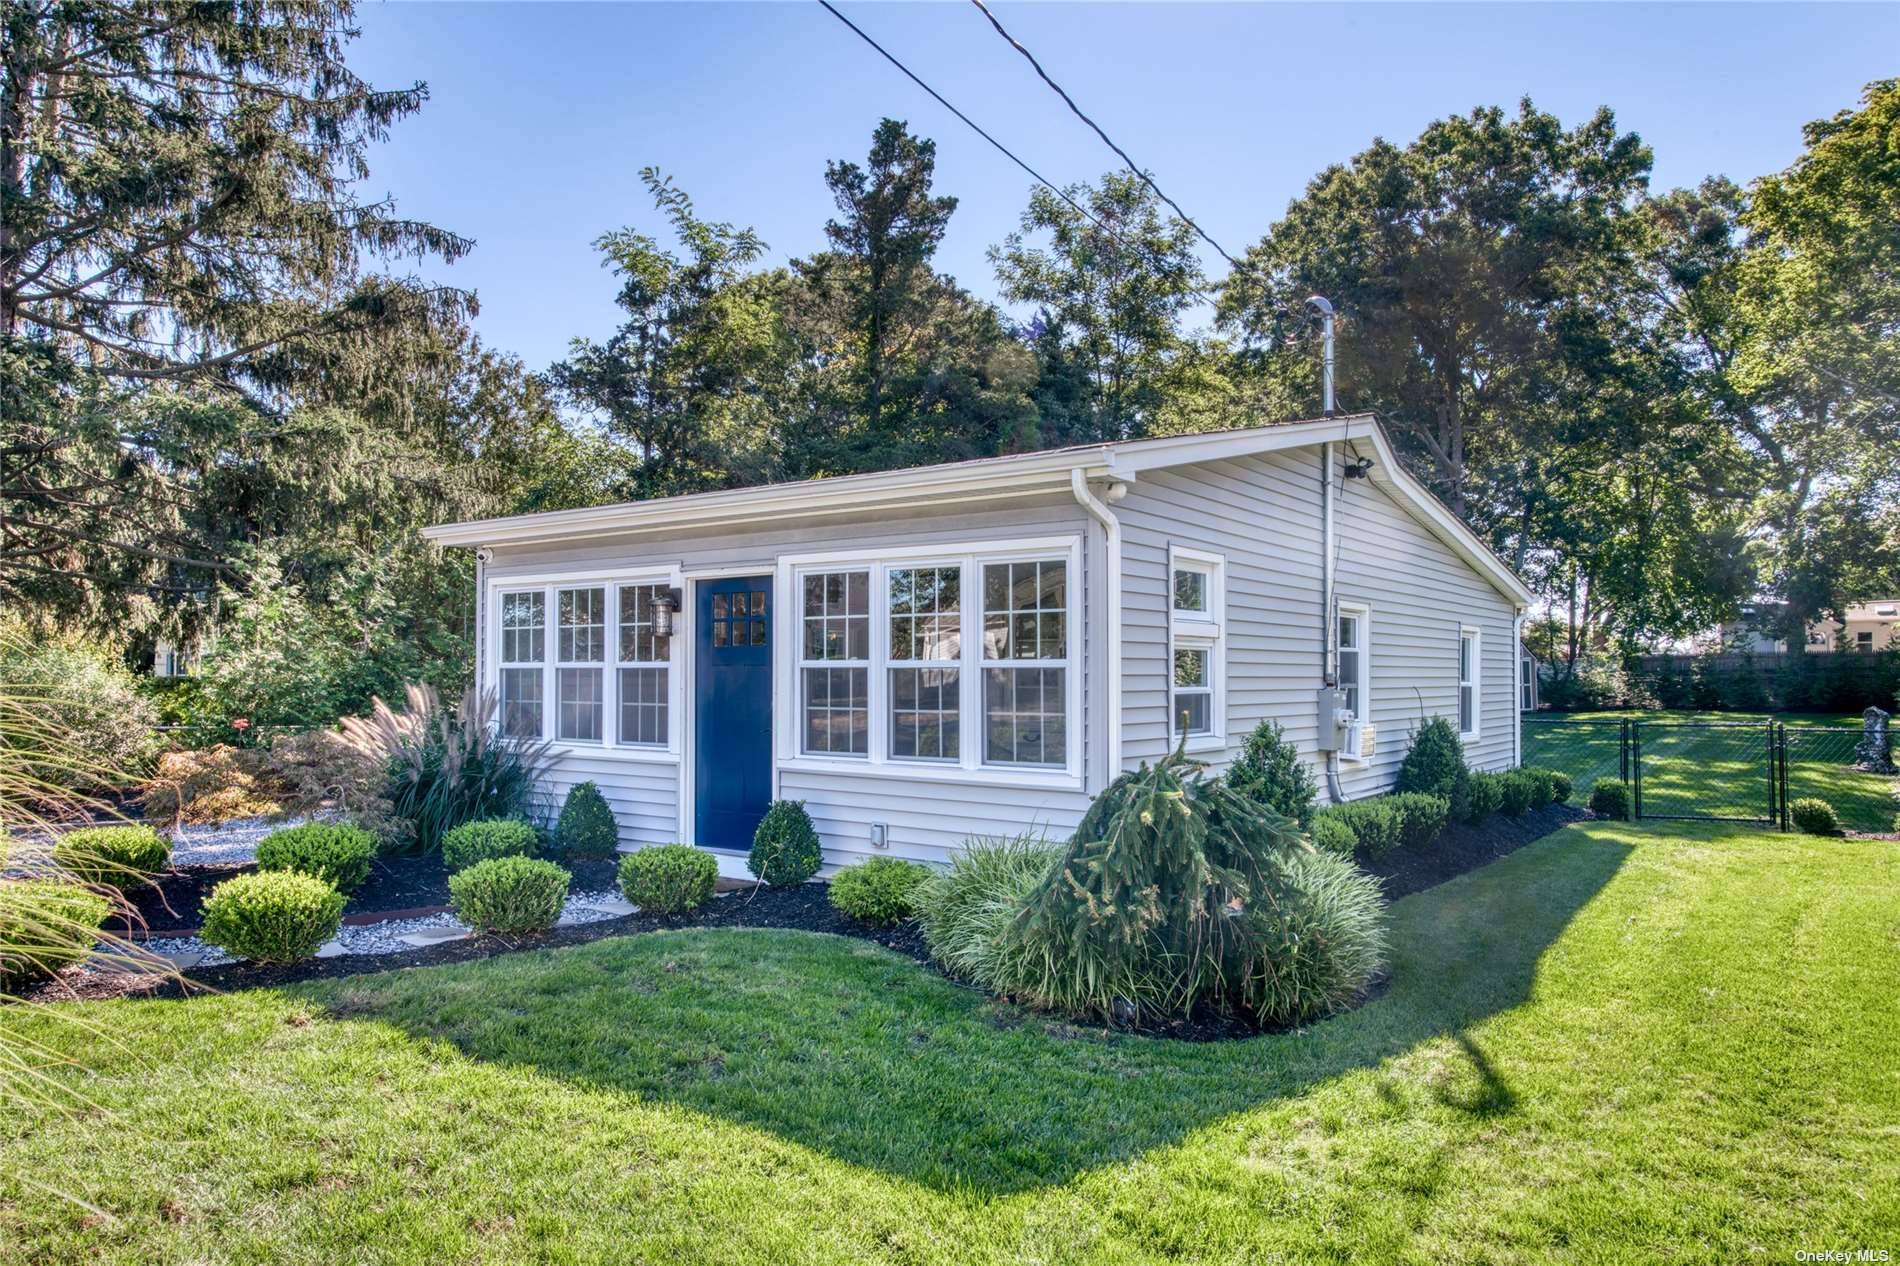 Charming 2 bed, 1 bath cottage a half mile to love lane and bay beach at Veterans Park.